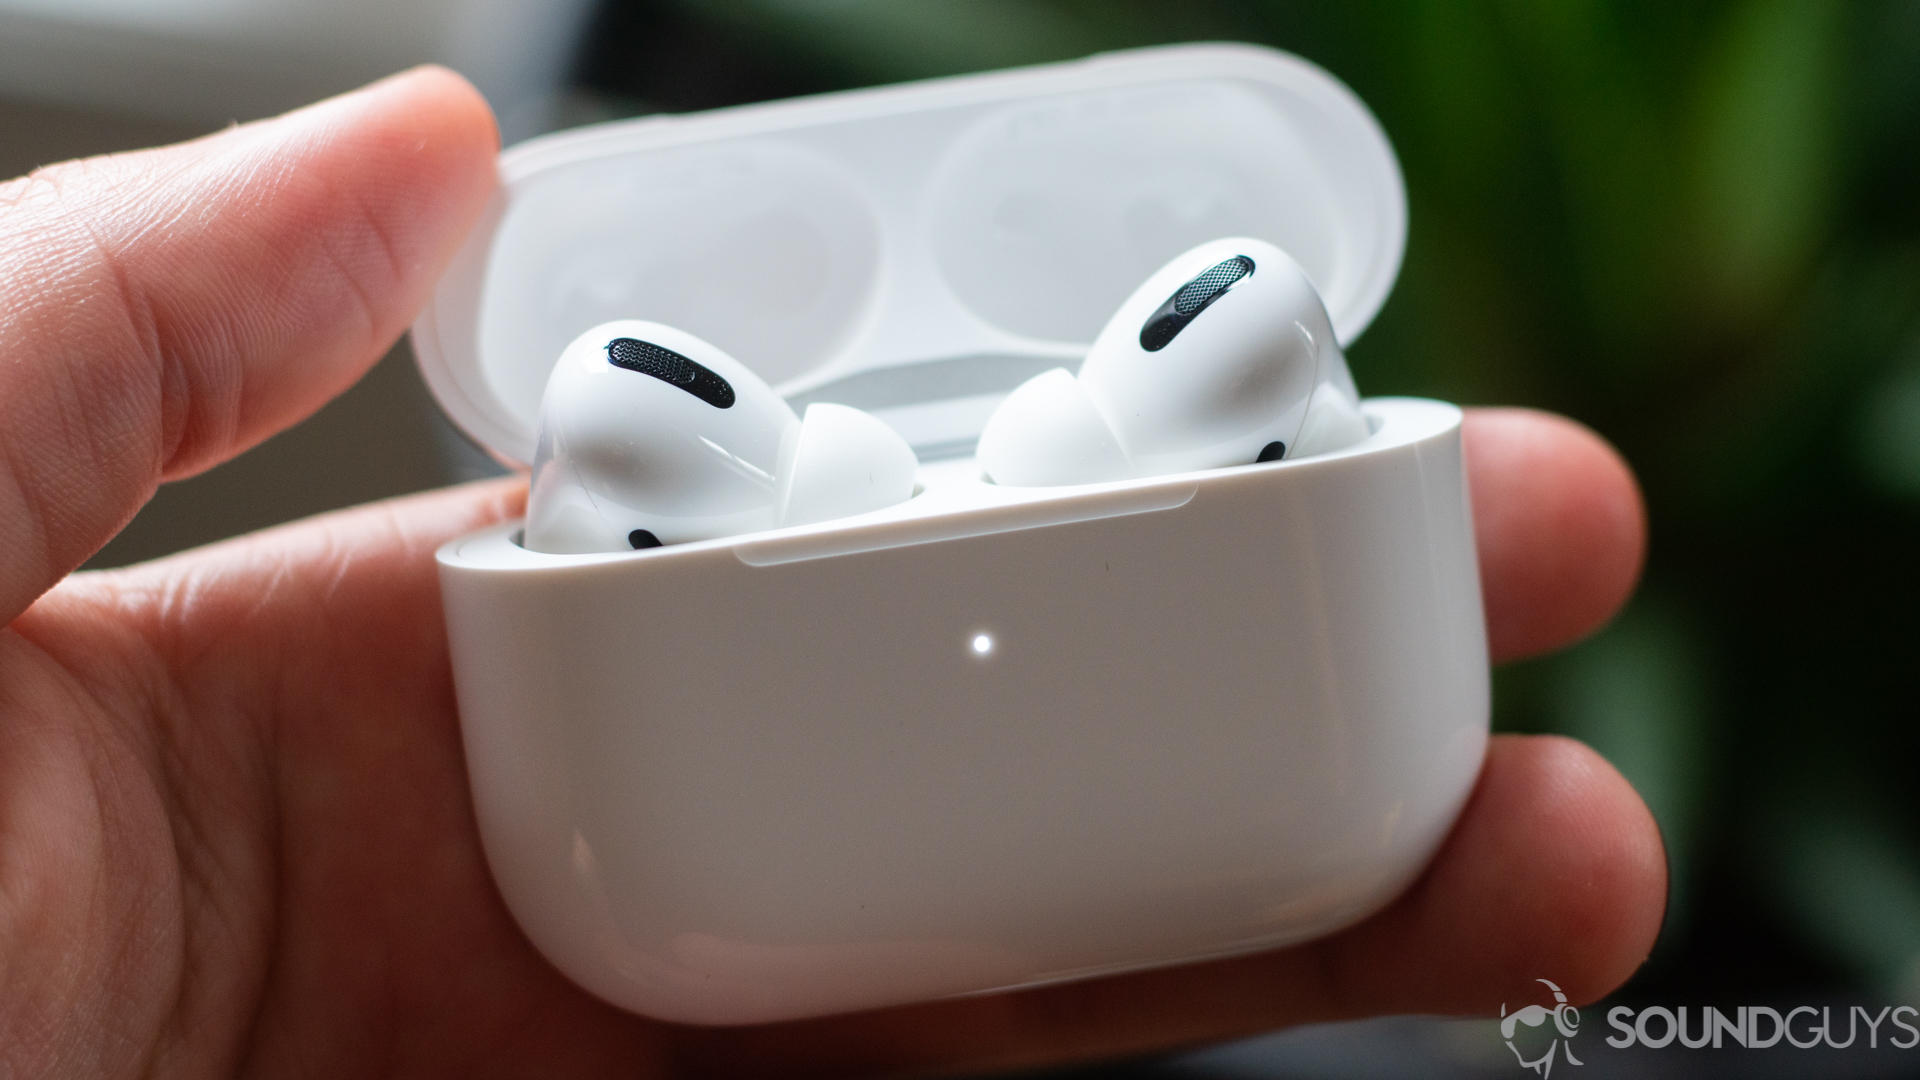 The Apple AirPods Pro earbuds charging case in a man's hand.